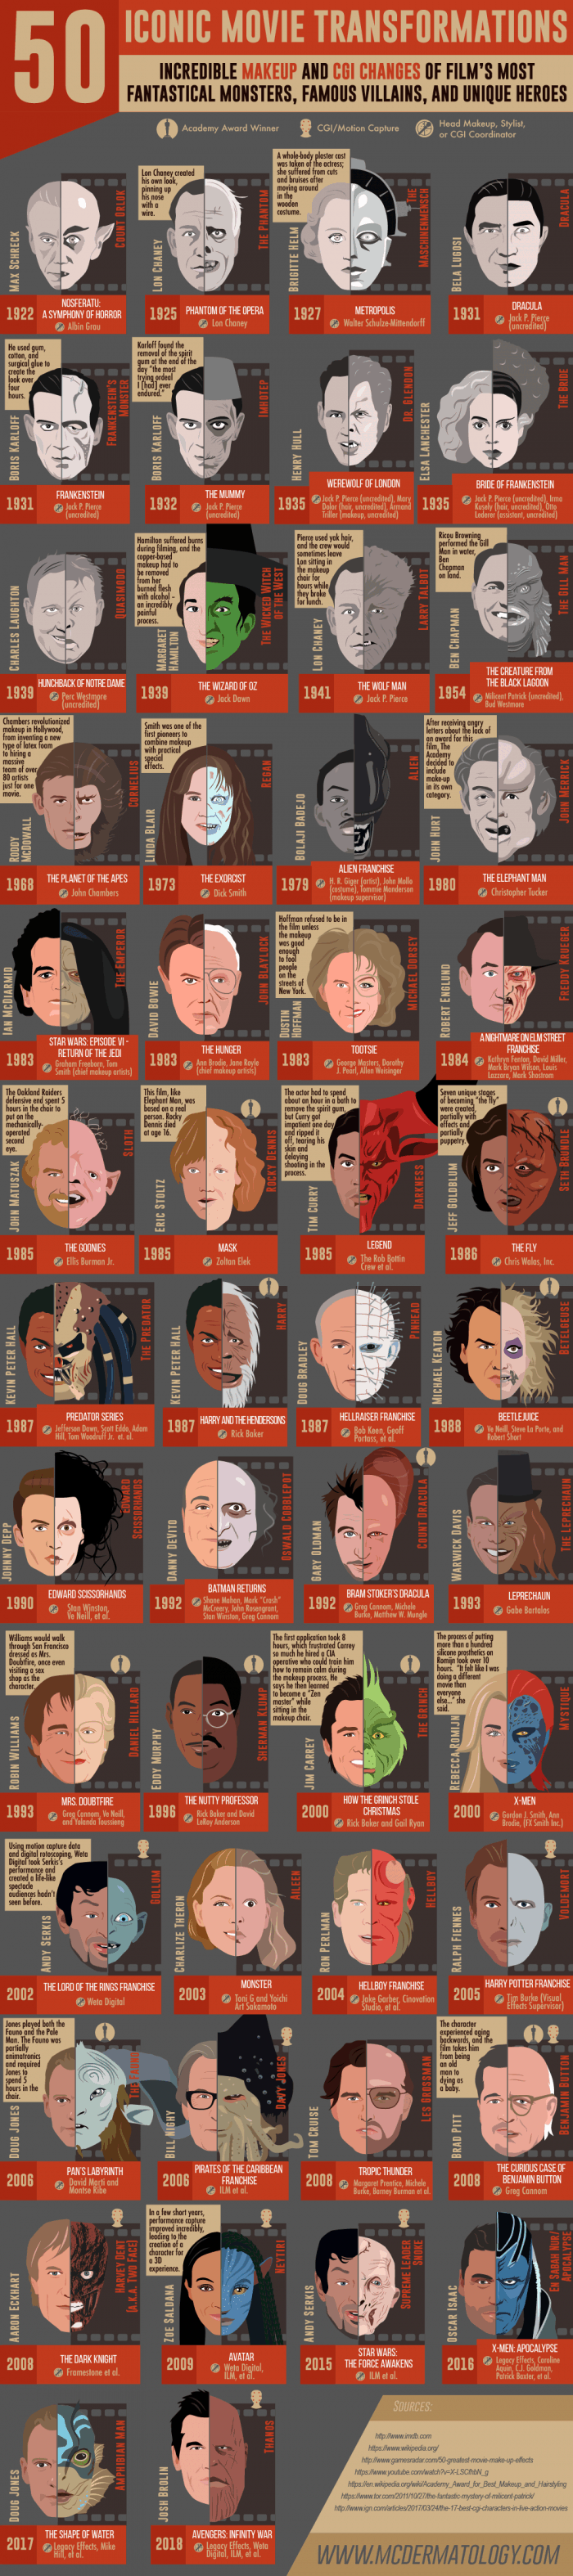 infographic of CGI and makeup in movies